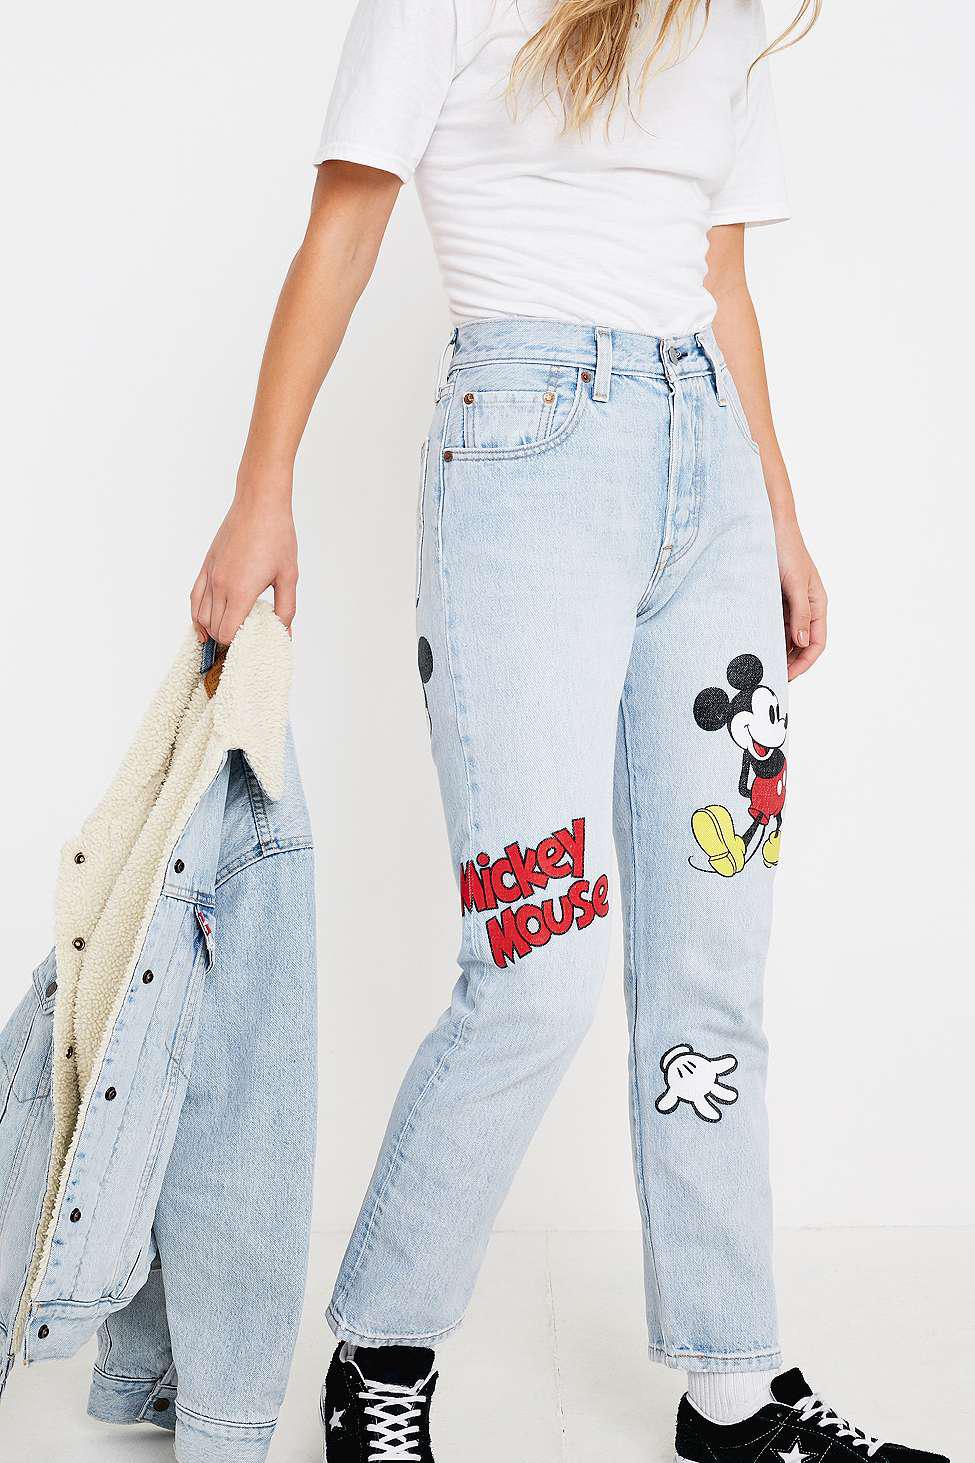 jeans mickey mouse levis, Off 73%, www.scrimaglio.com